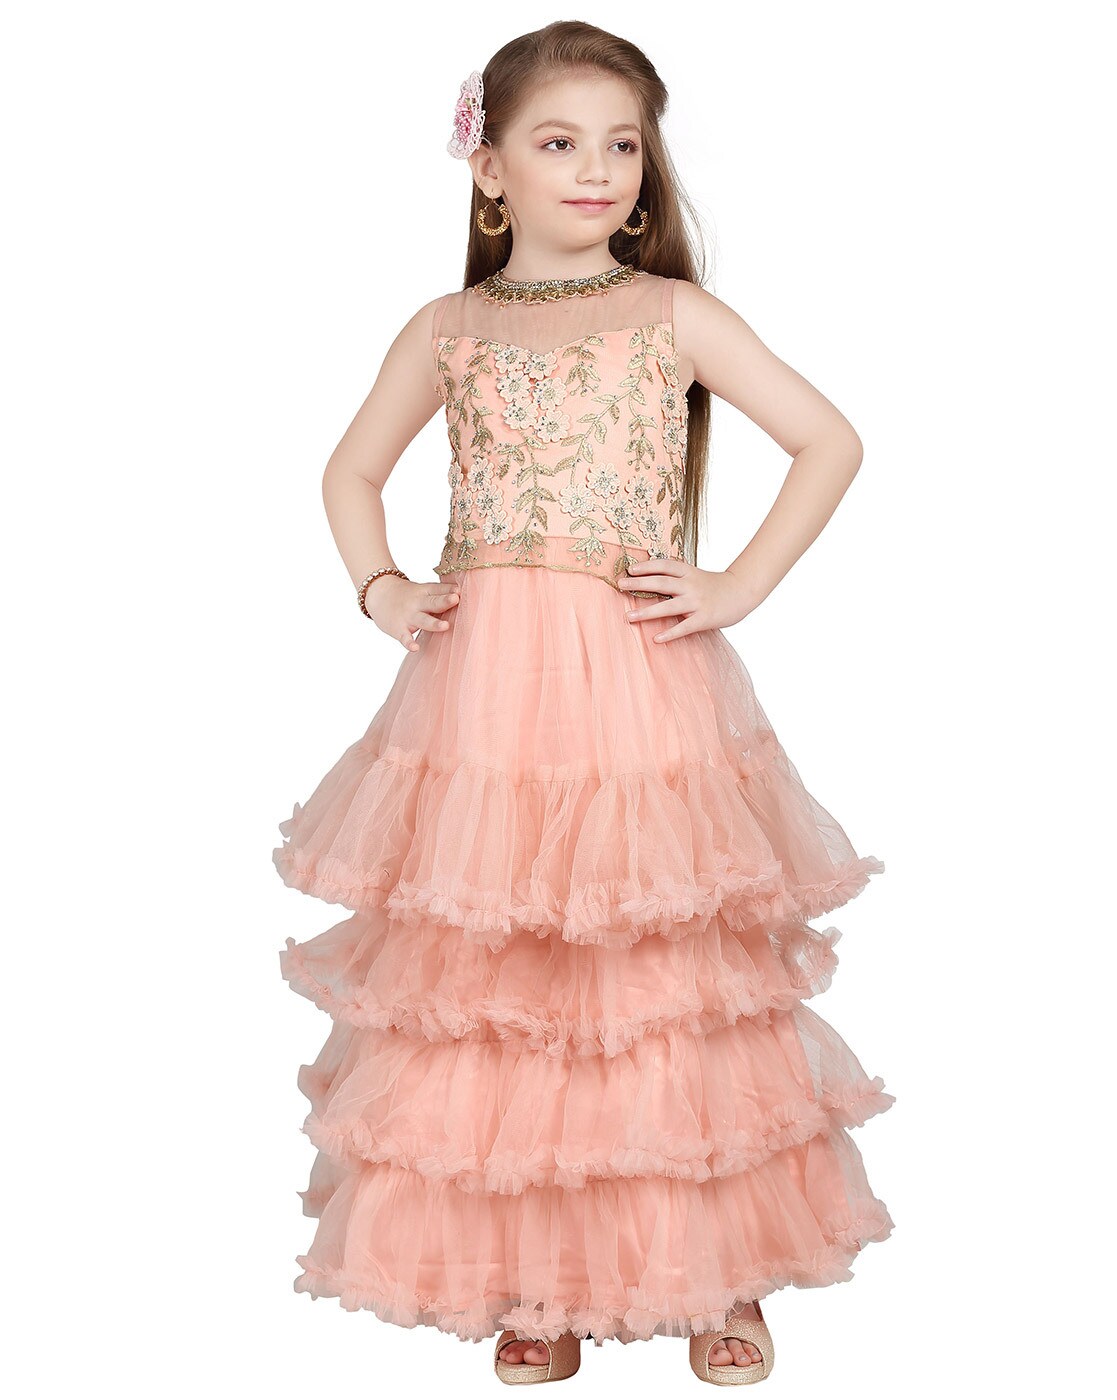 Buy Wedding Gown for Kid Girl |Indian Wedding Party Gowns/Dress